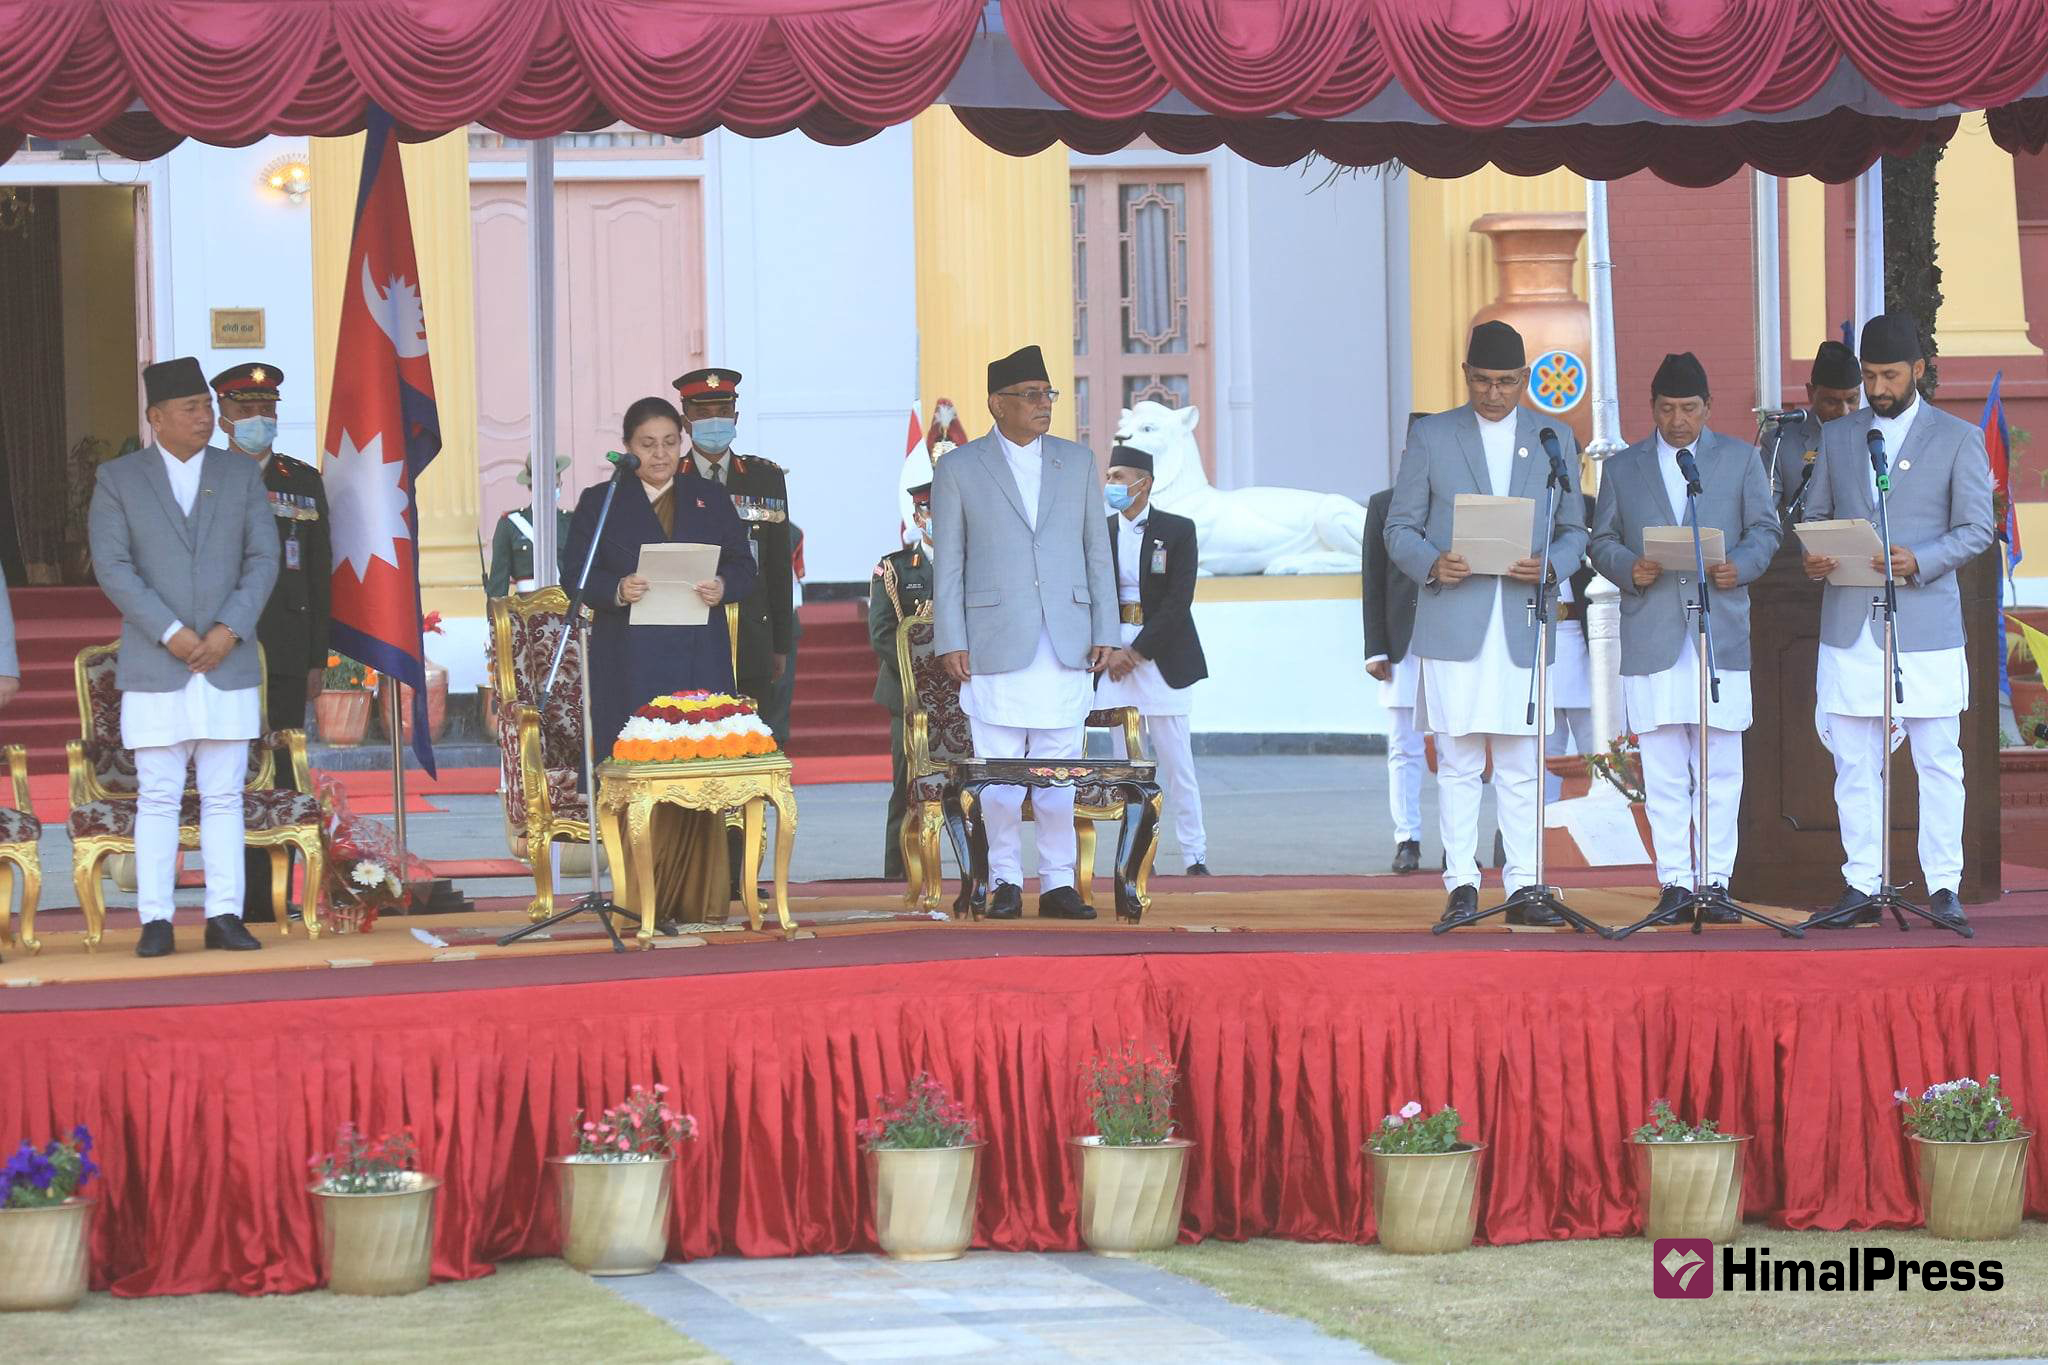 Five new faces in Dahal’s cabinet